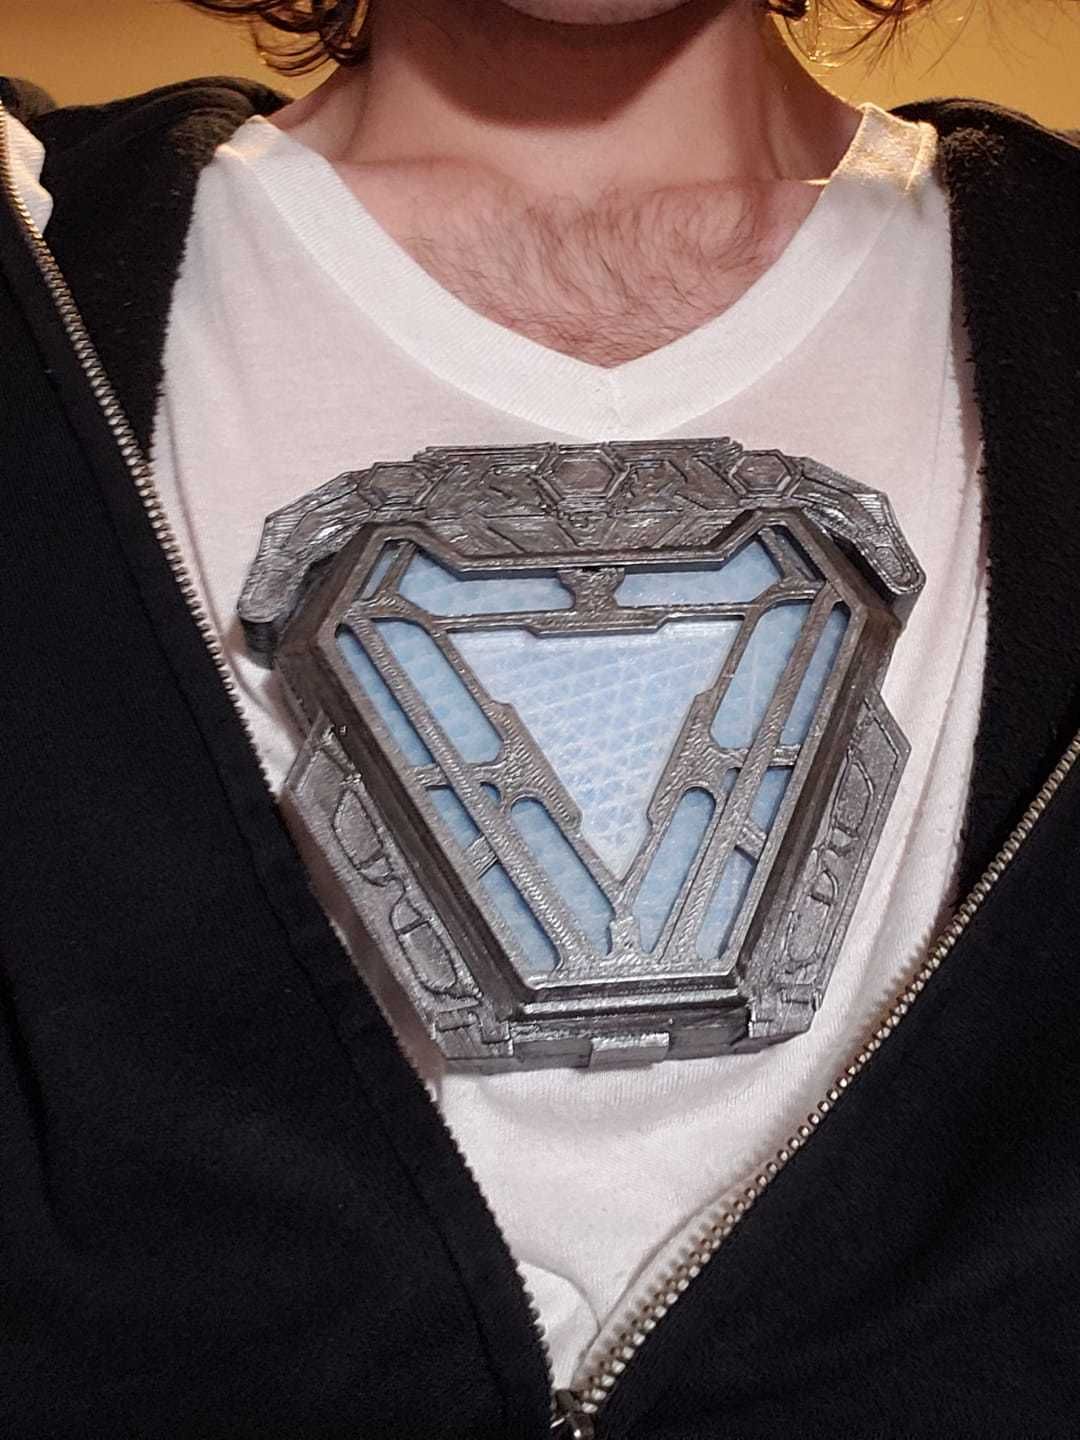 60690059_2290587917861811_2728551001836486656_o.jpg Free STL file Tony Stark Arc Reactor Infinity War & Endgame・Object to download and to 3D print, valertale